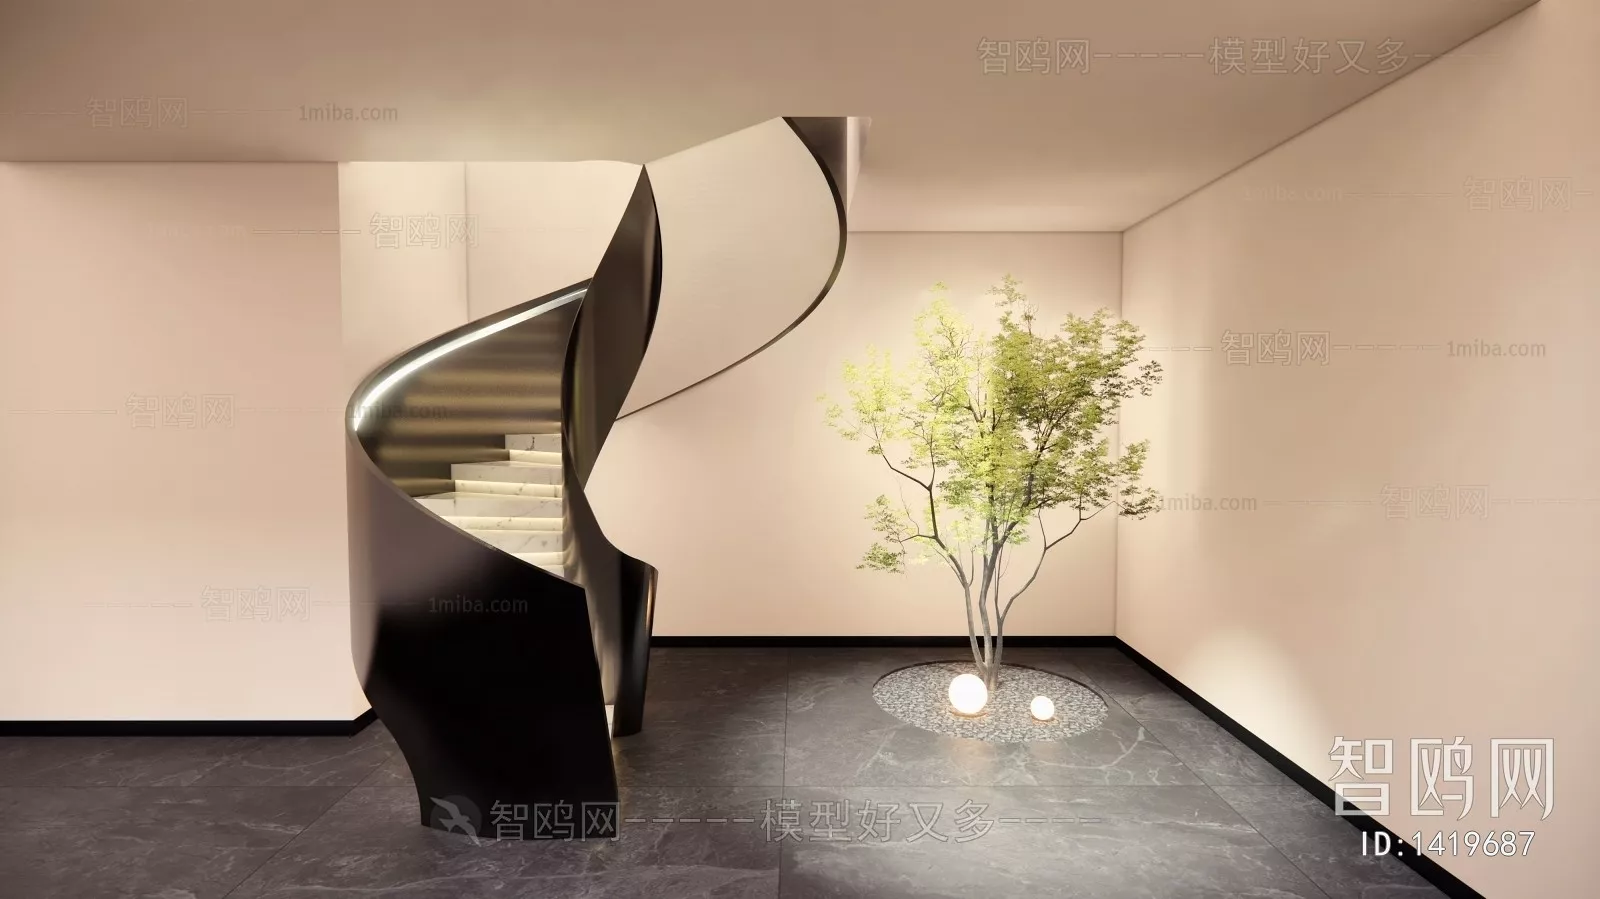 MODERN STAIR - SKETCHUP 3D MODEL - VRAY OR ENSCAPE - ID14309